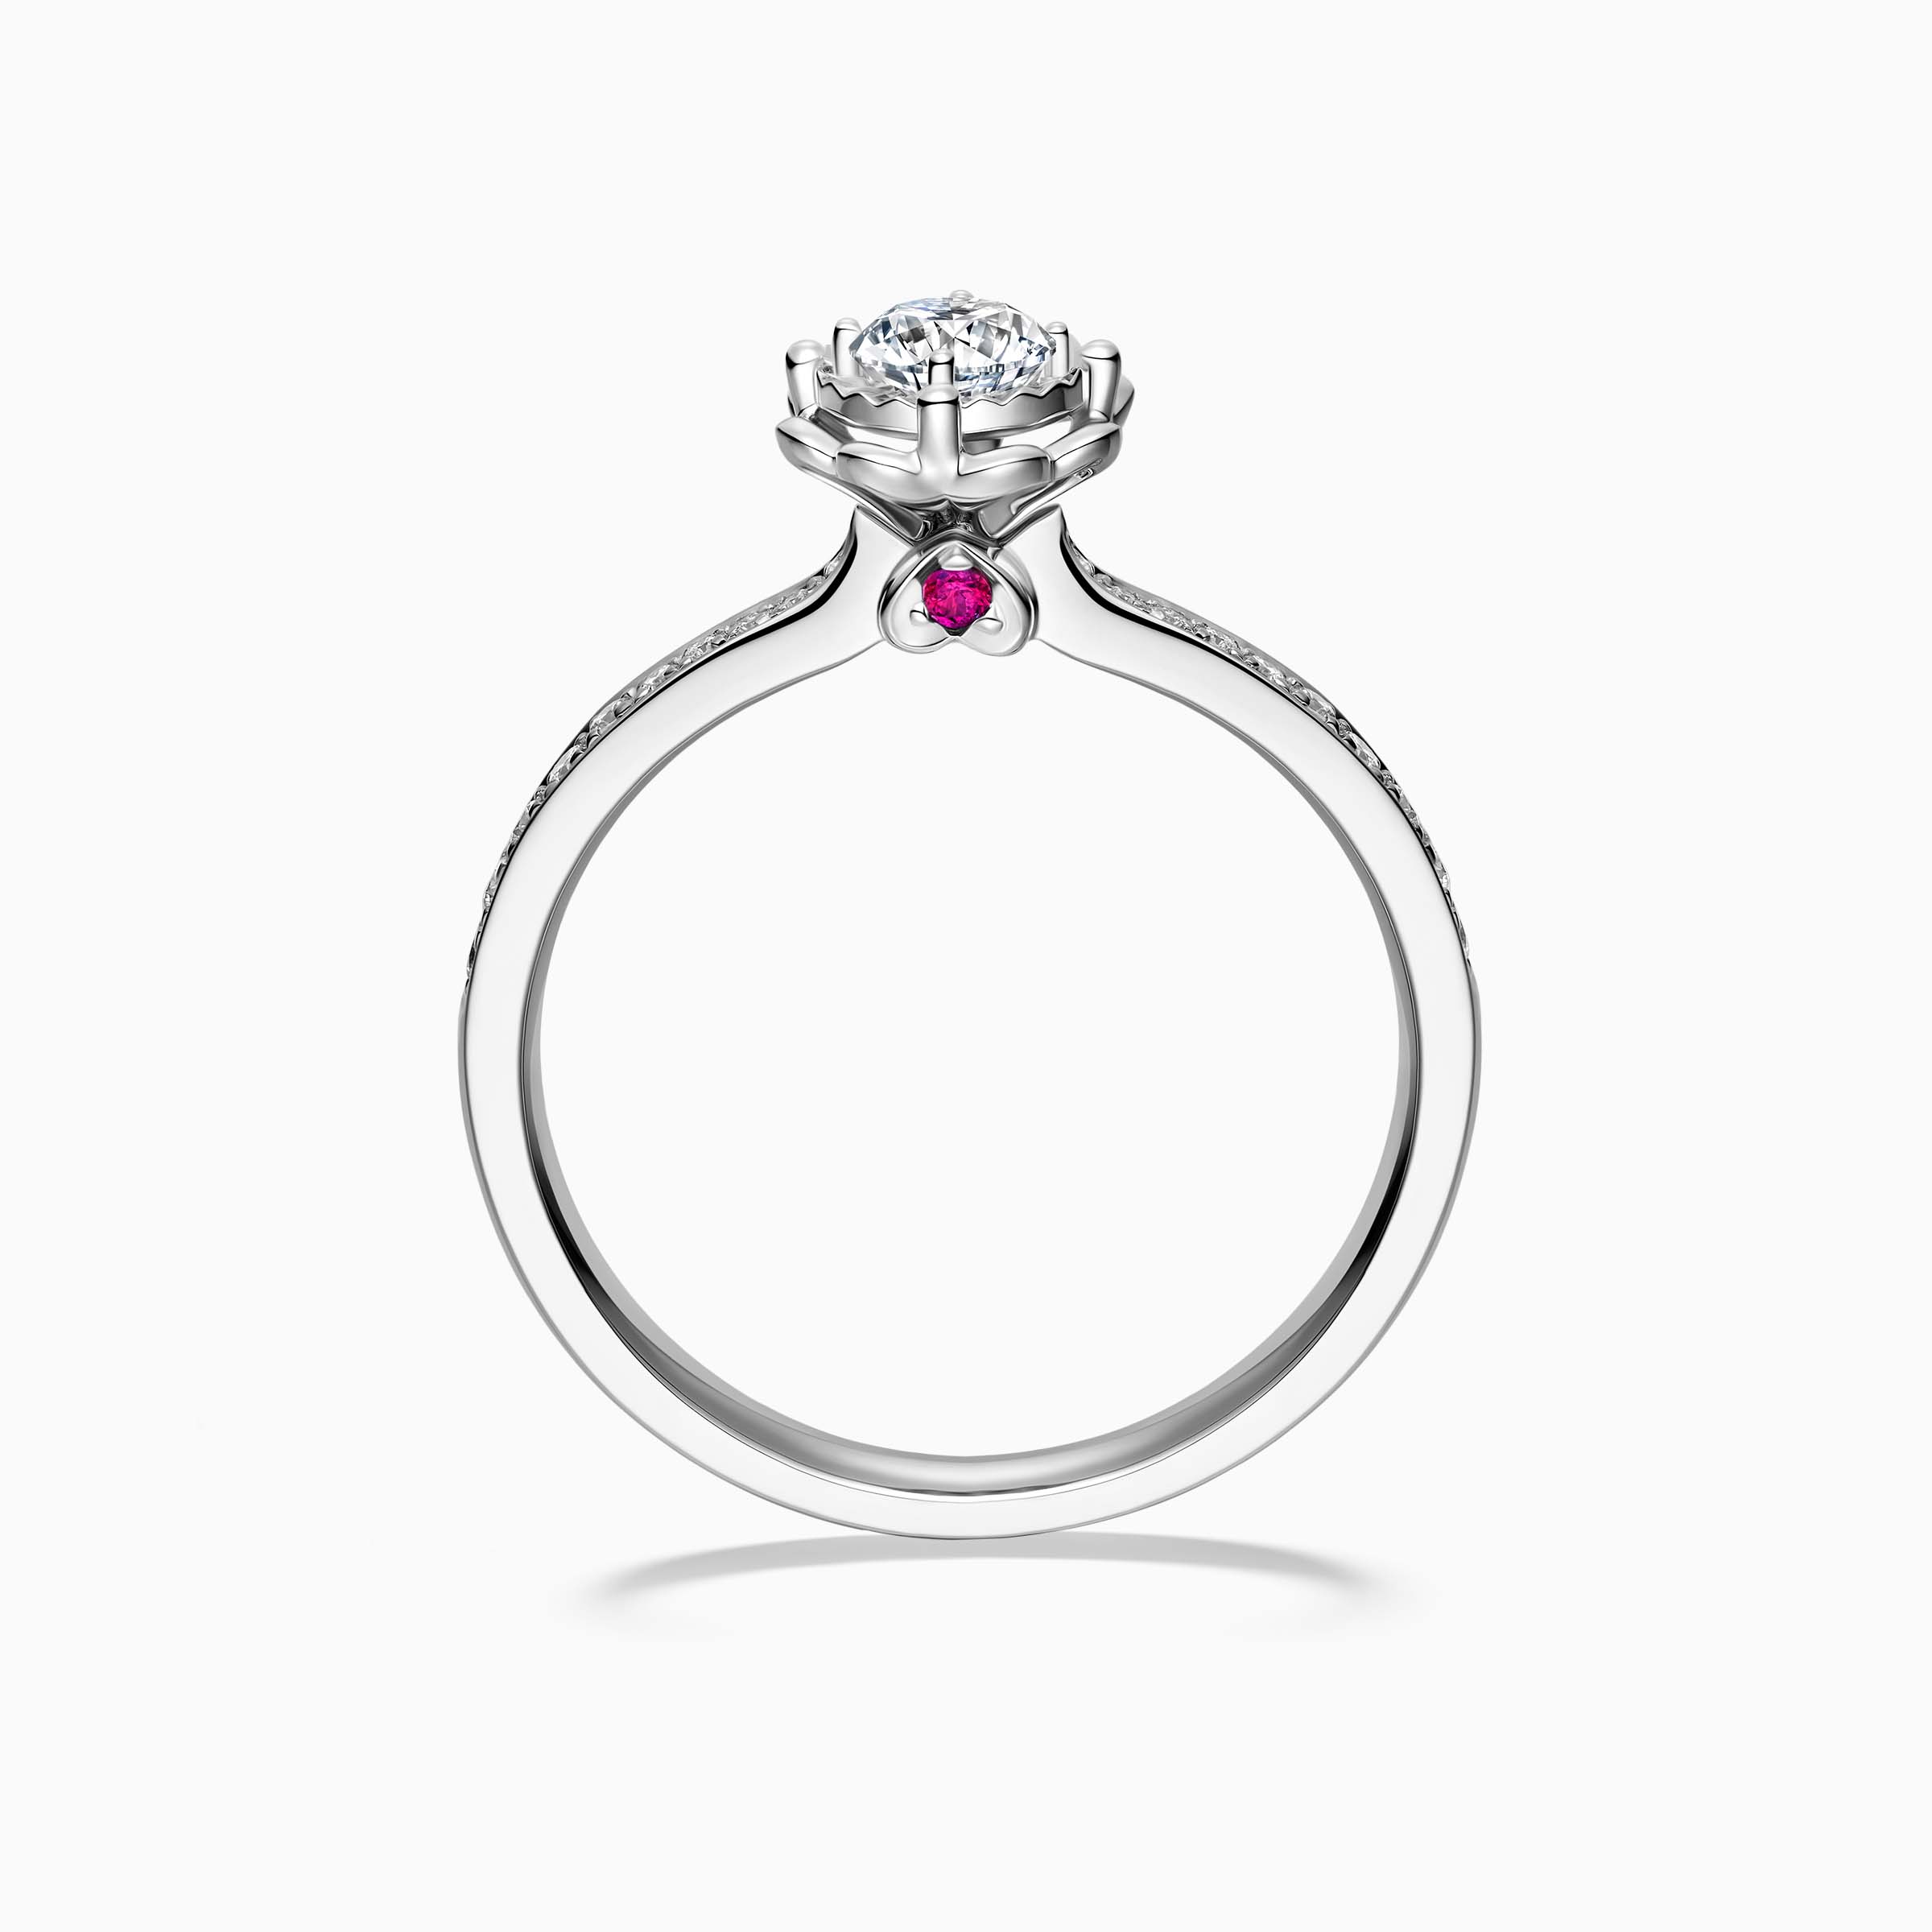 Darry Ring flower shaped engagement ring side view